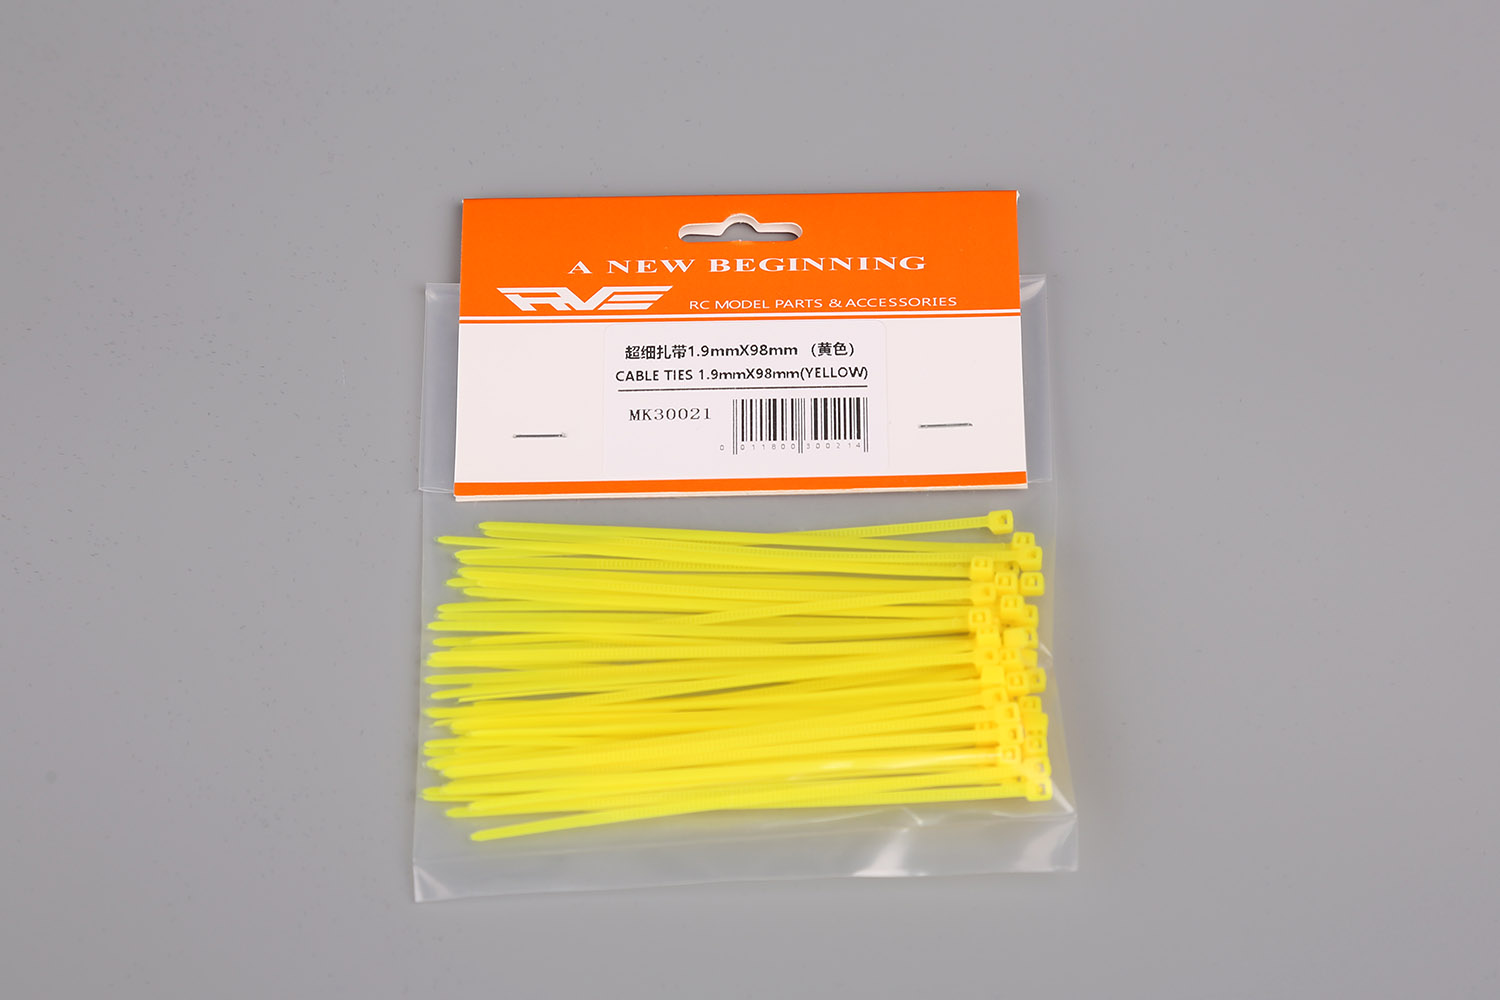 CABLE TIES 1.9mmX98mm (YELLOW) MK30021(图1)